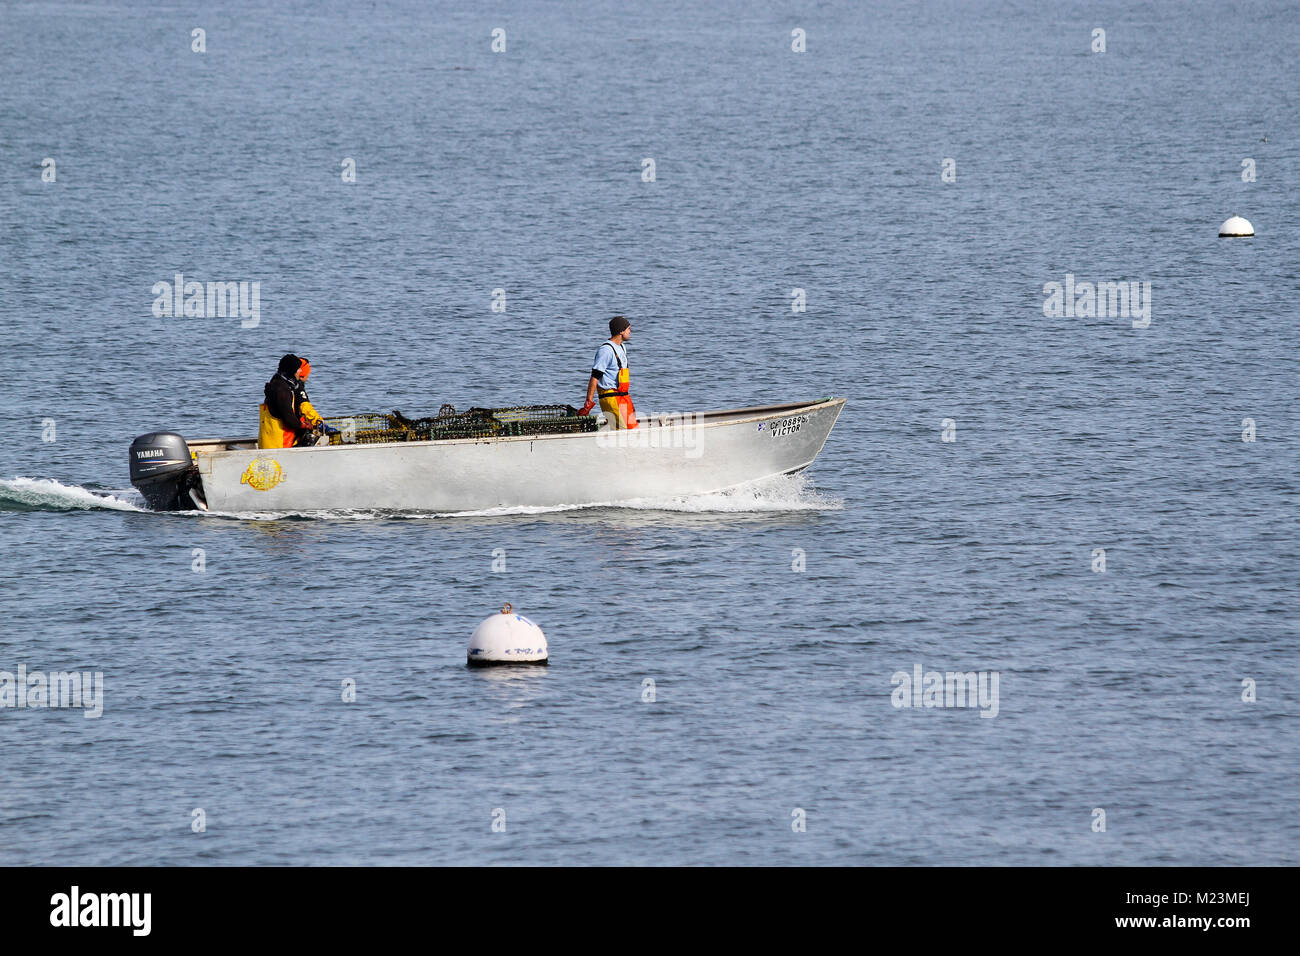 A small fishing boat in Monterey Bay, Monterey, California, Unted States Stock Photo